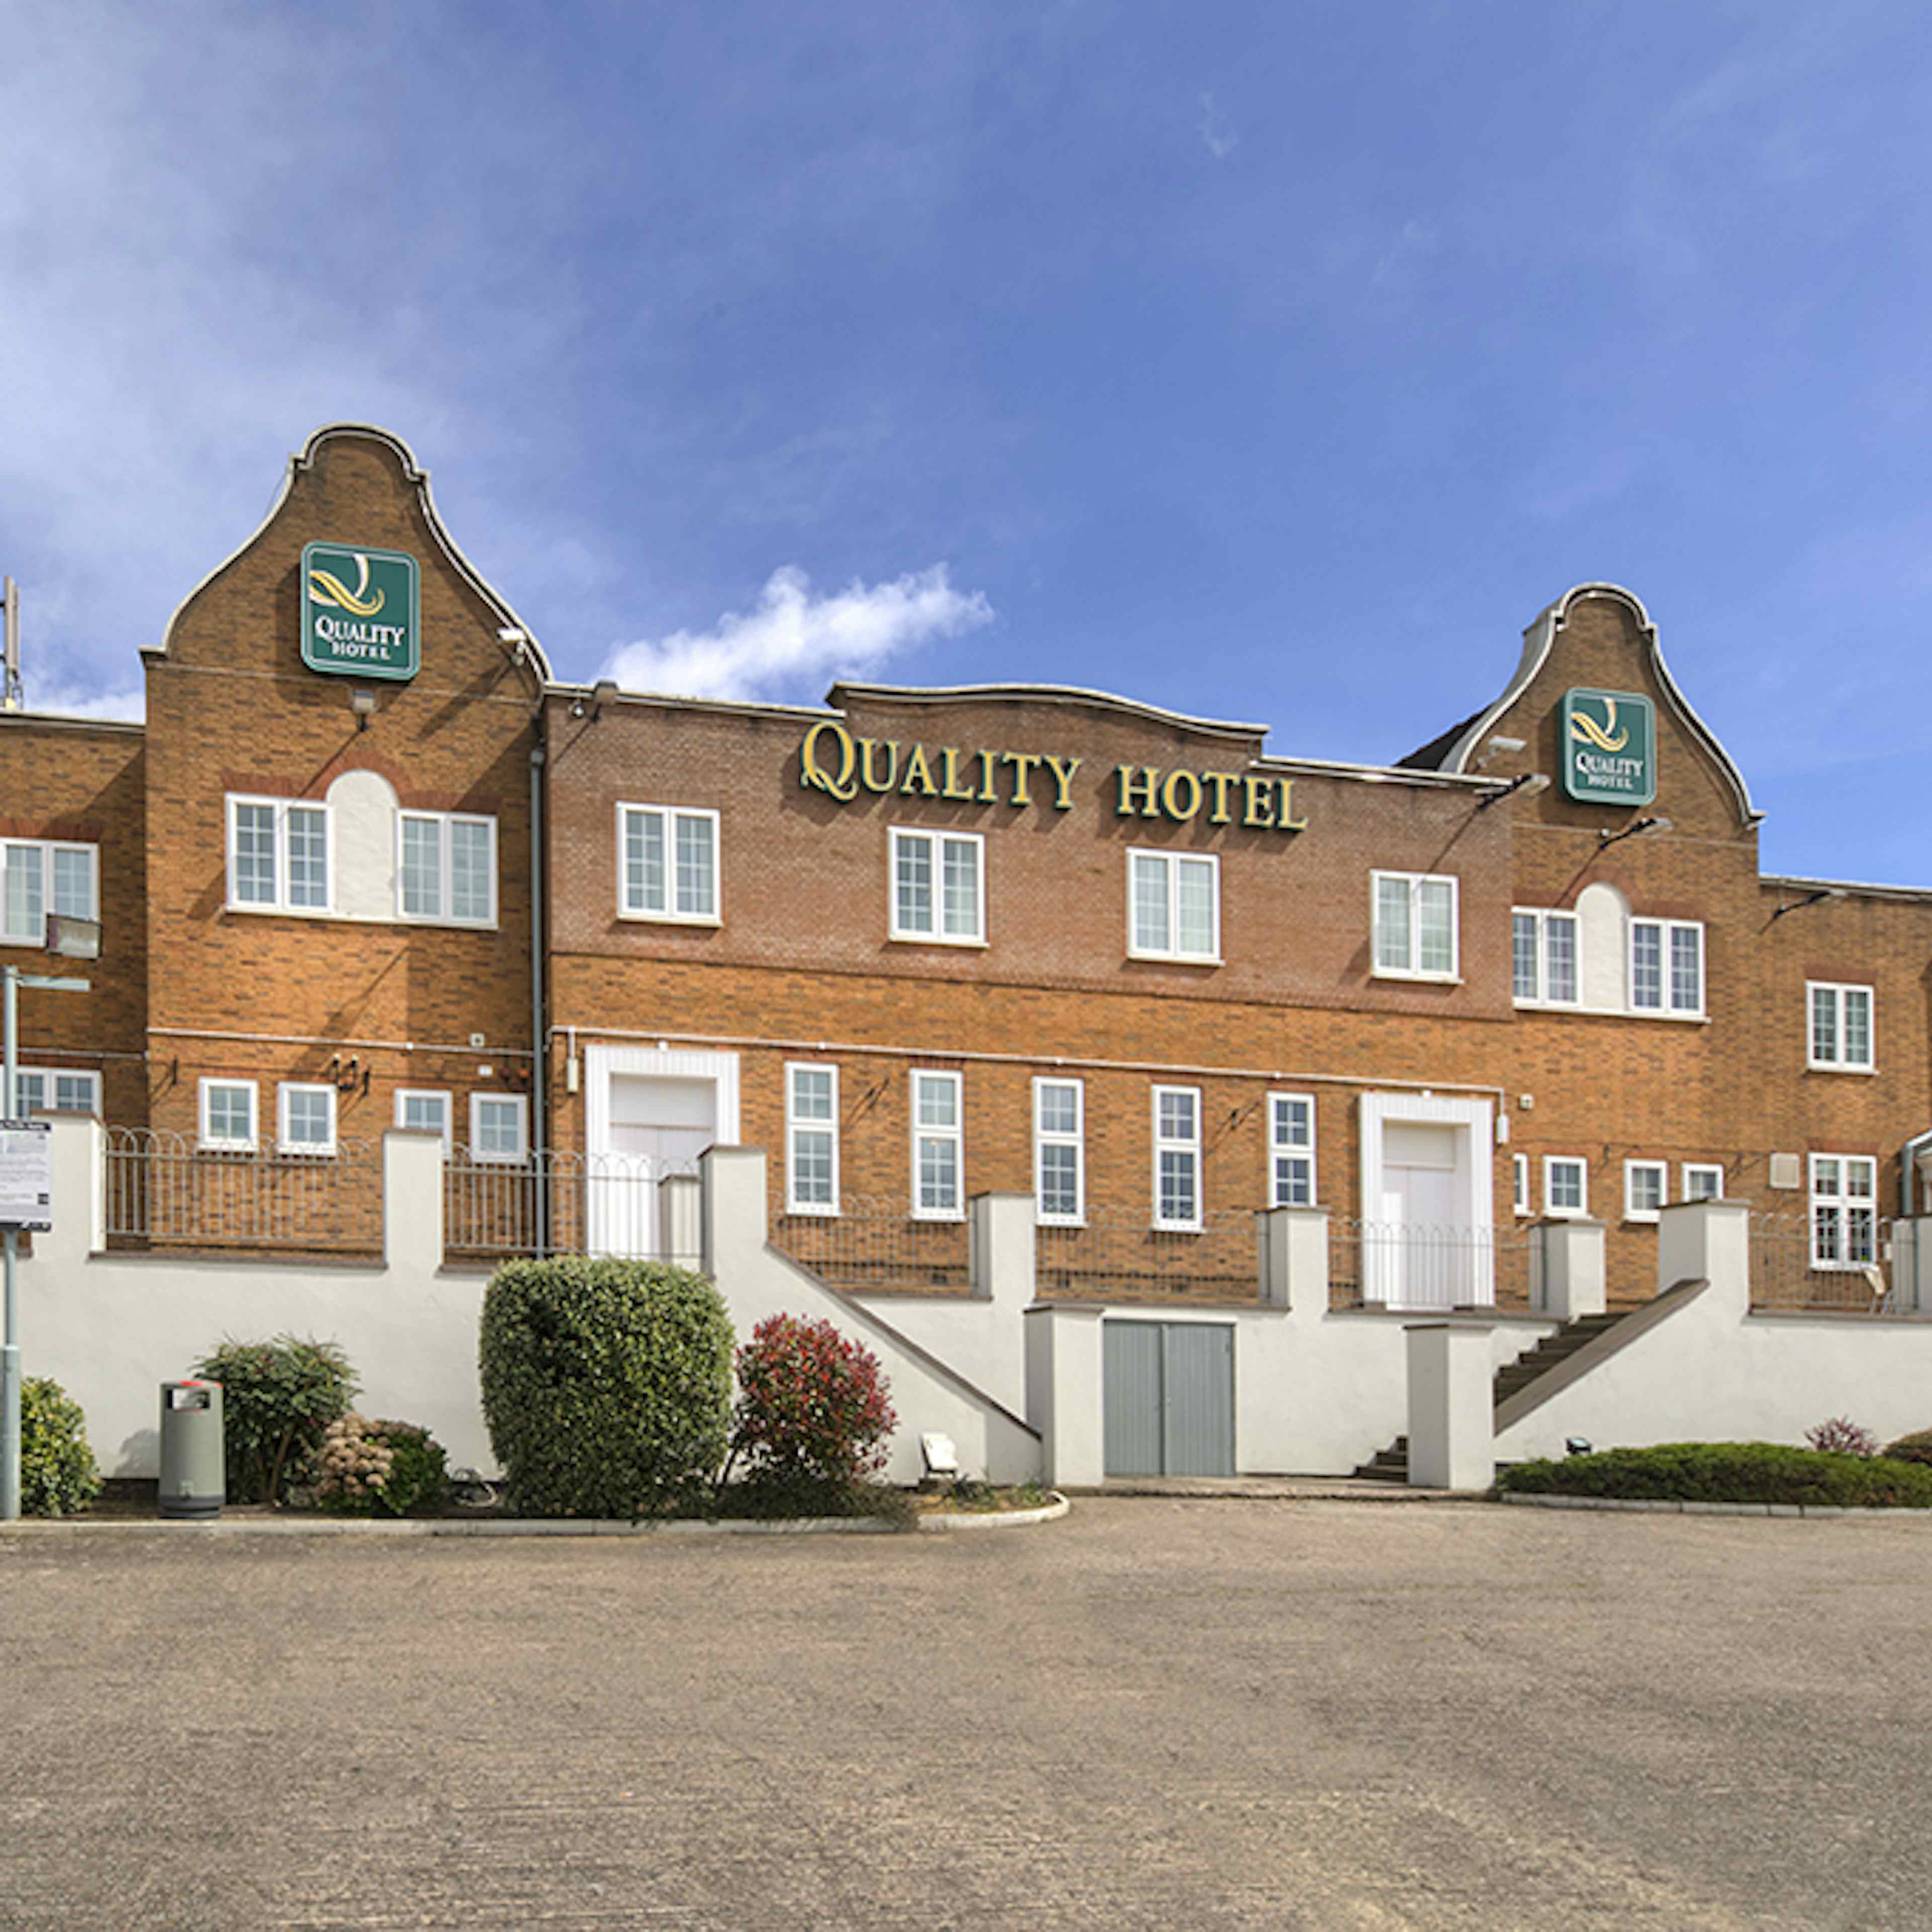 Quality Hotel Coventry - Manor Suite image 3